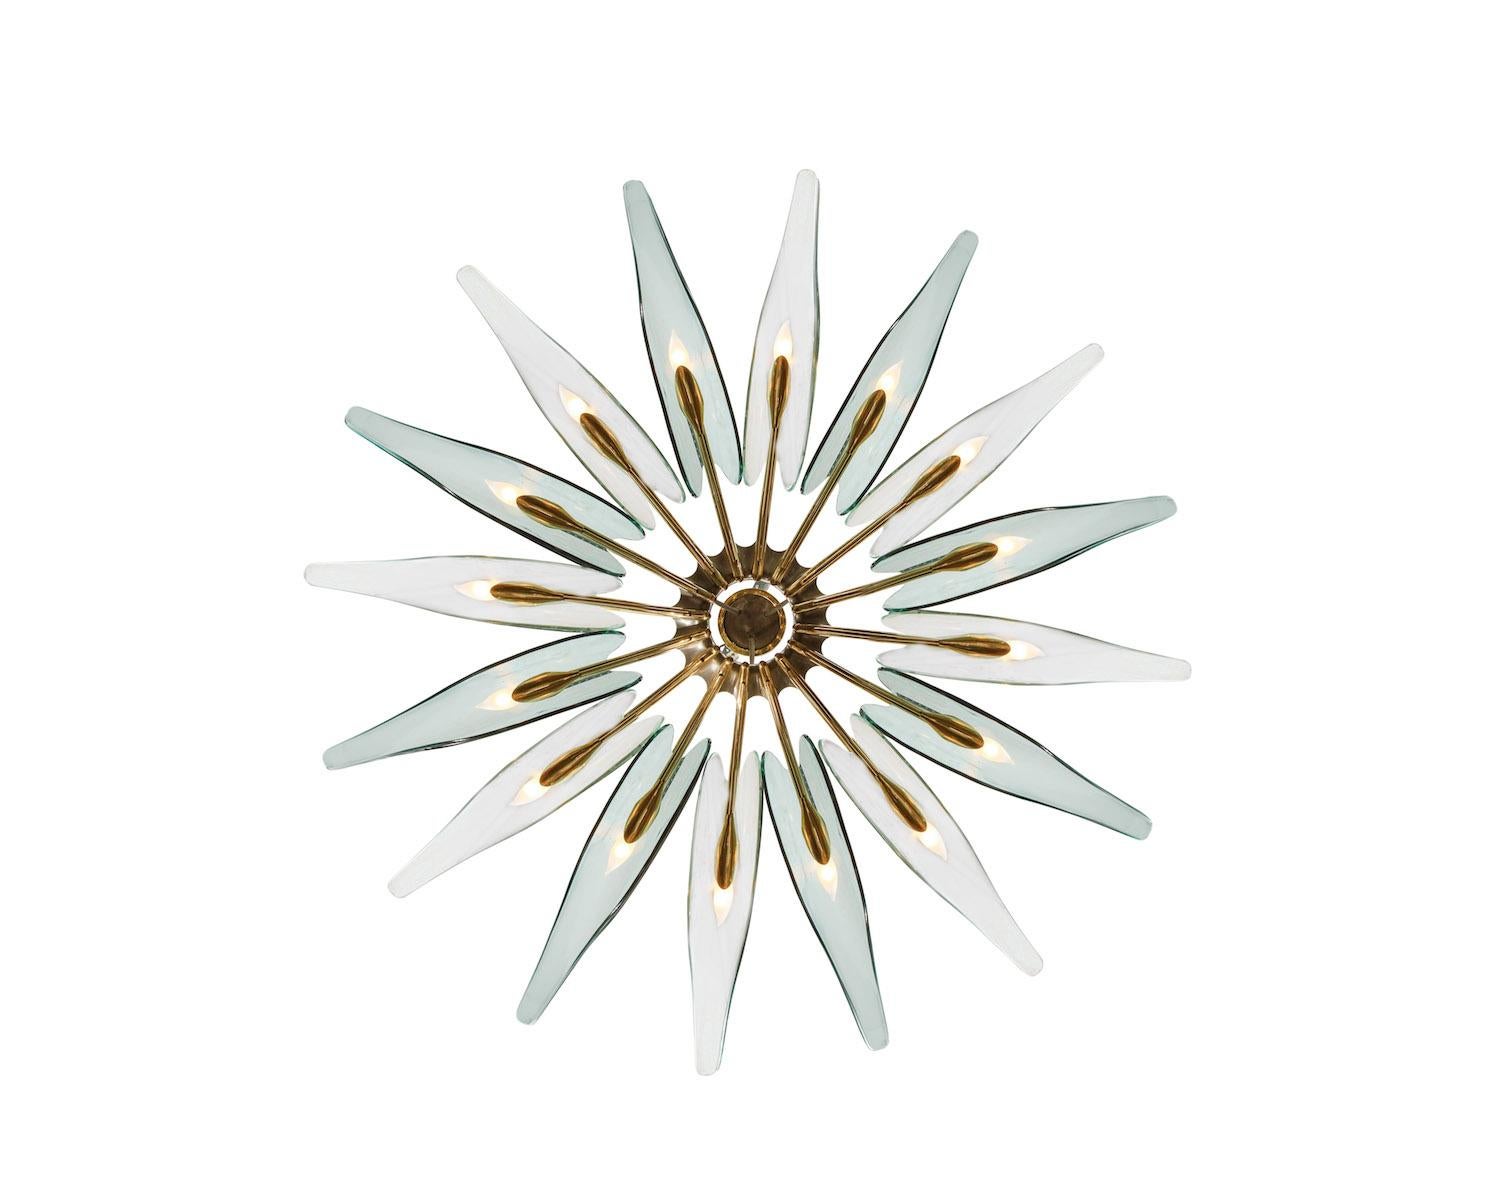 Rare Dahlia Chandelier by Max Ingrand for Fontana Arte.  16-light fixture of oxidized brass and nickeled metal. Each arm has an elongated glass petal and one candelabra socket. Glass petals alternate between clear and pale green colored glass.